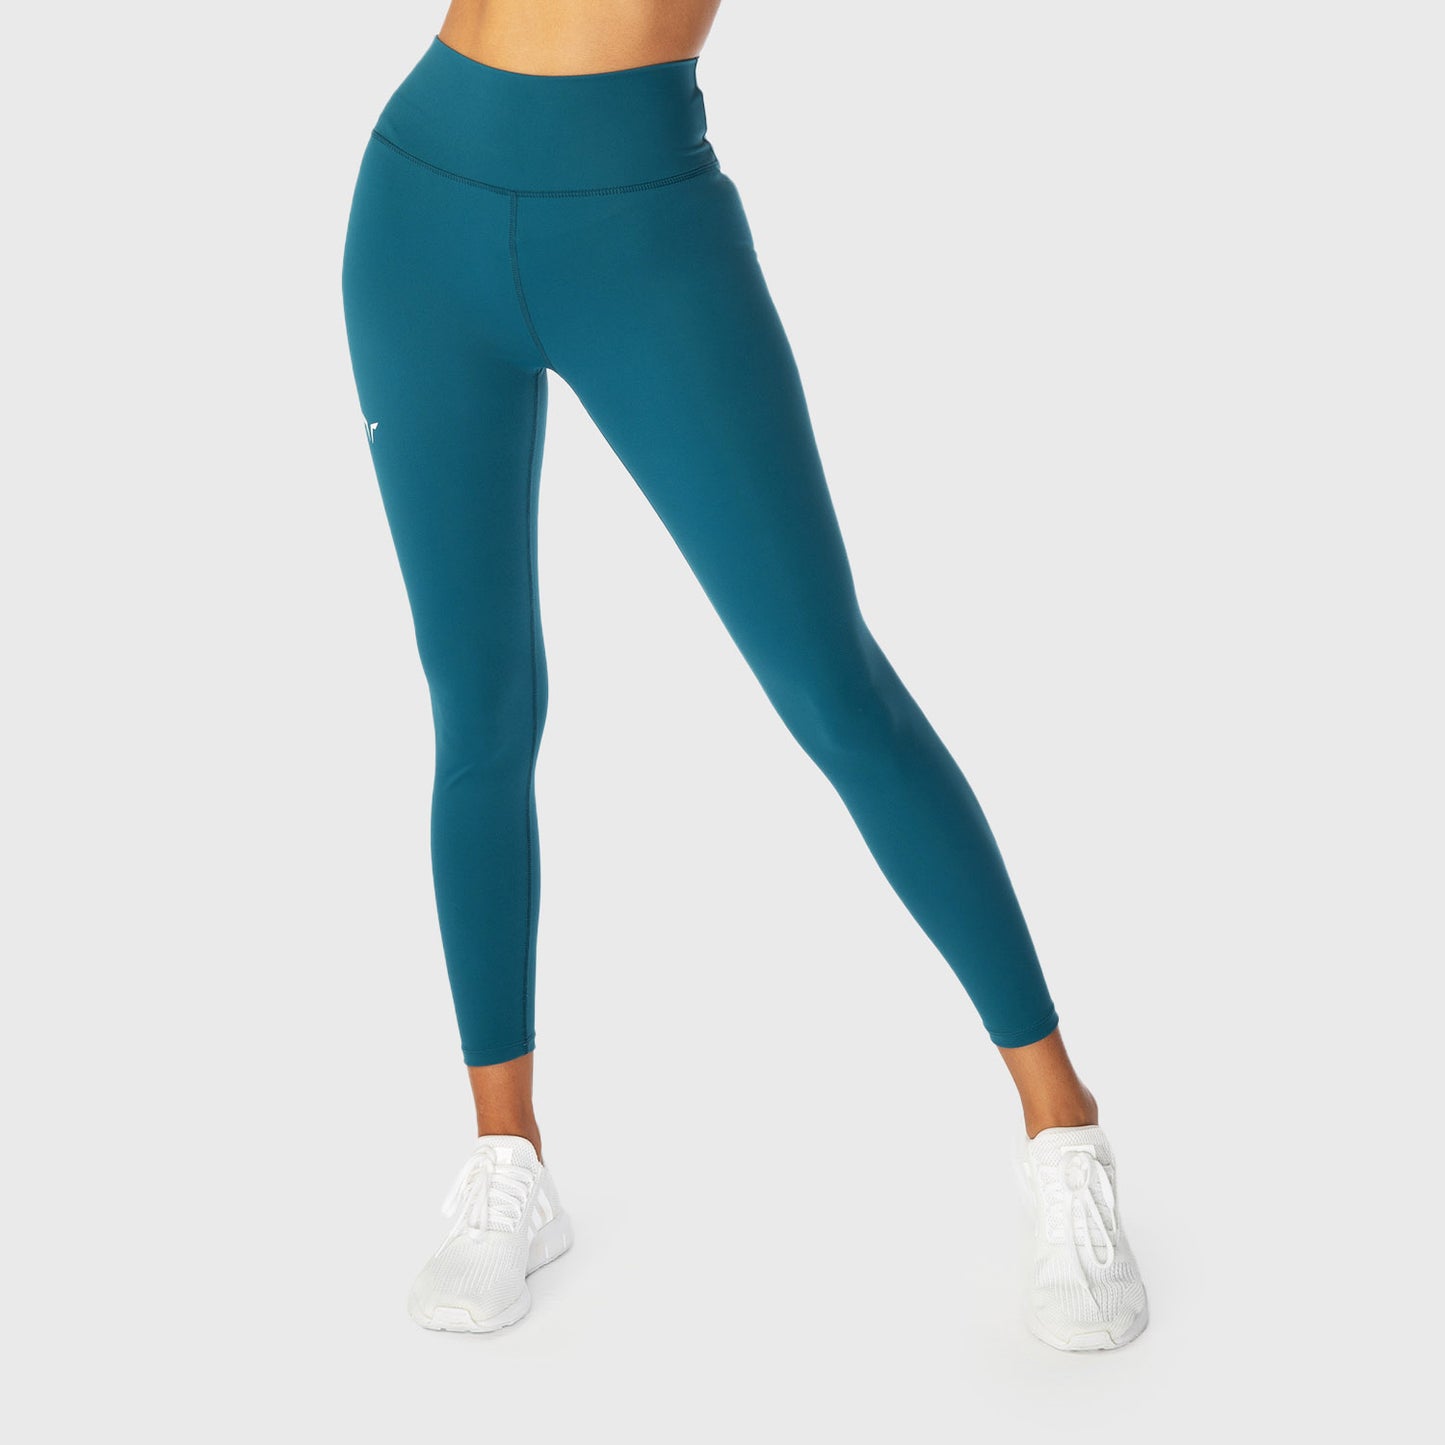 squatwolf-workout-clothes-infinity-cropped-7-8-leggings-blue-coral-leggings-for-women